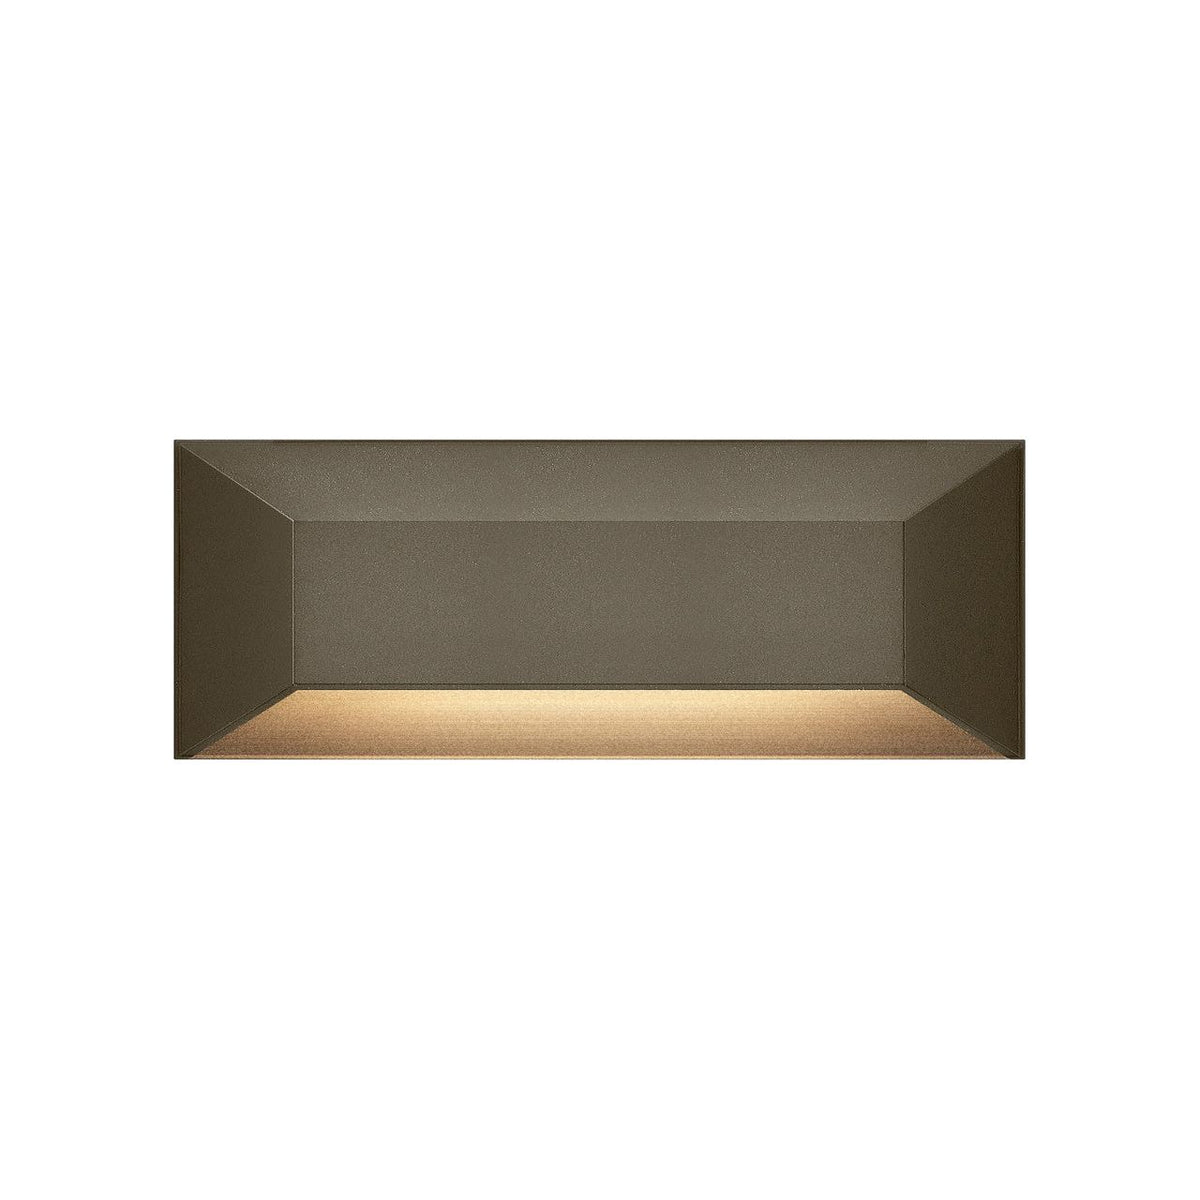 Hinkley Canada - 15228BZ - LED Wall Sconce - Nuvi Deck Sconce - Bronze